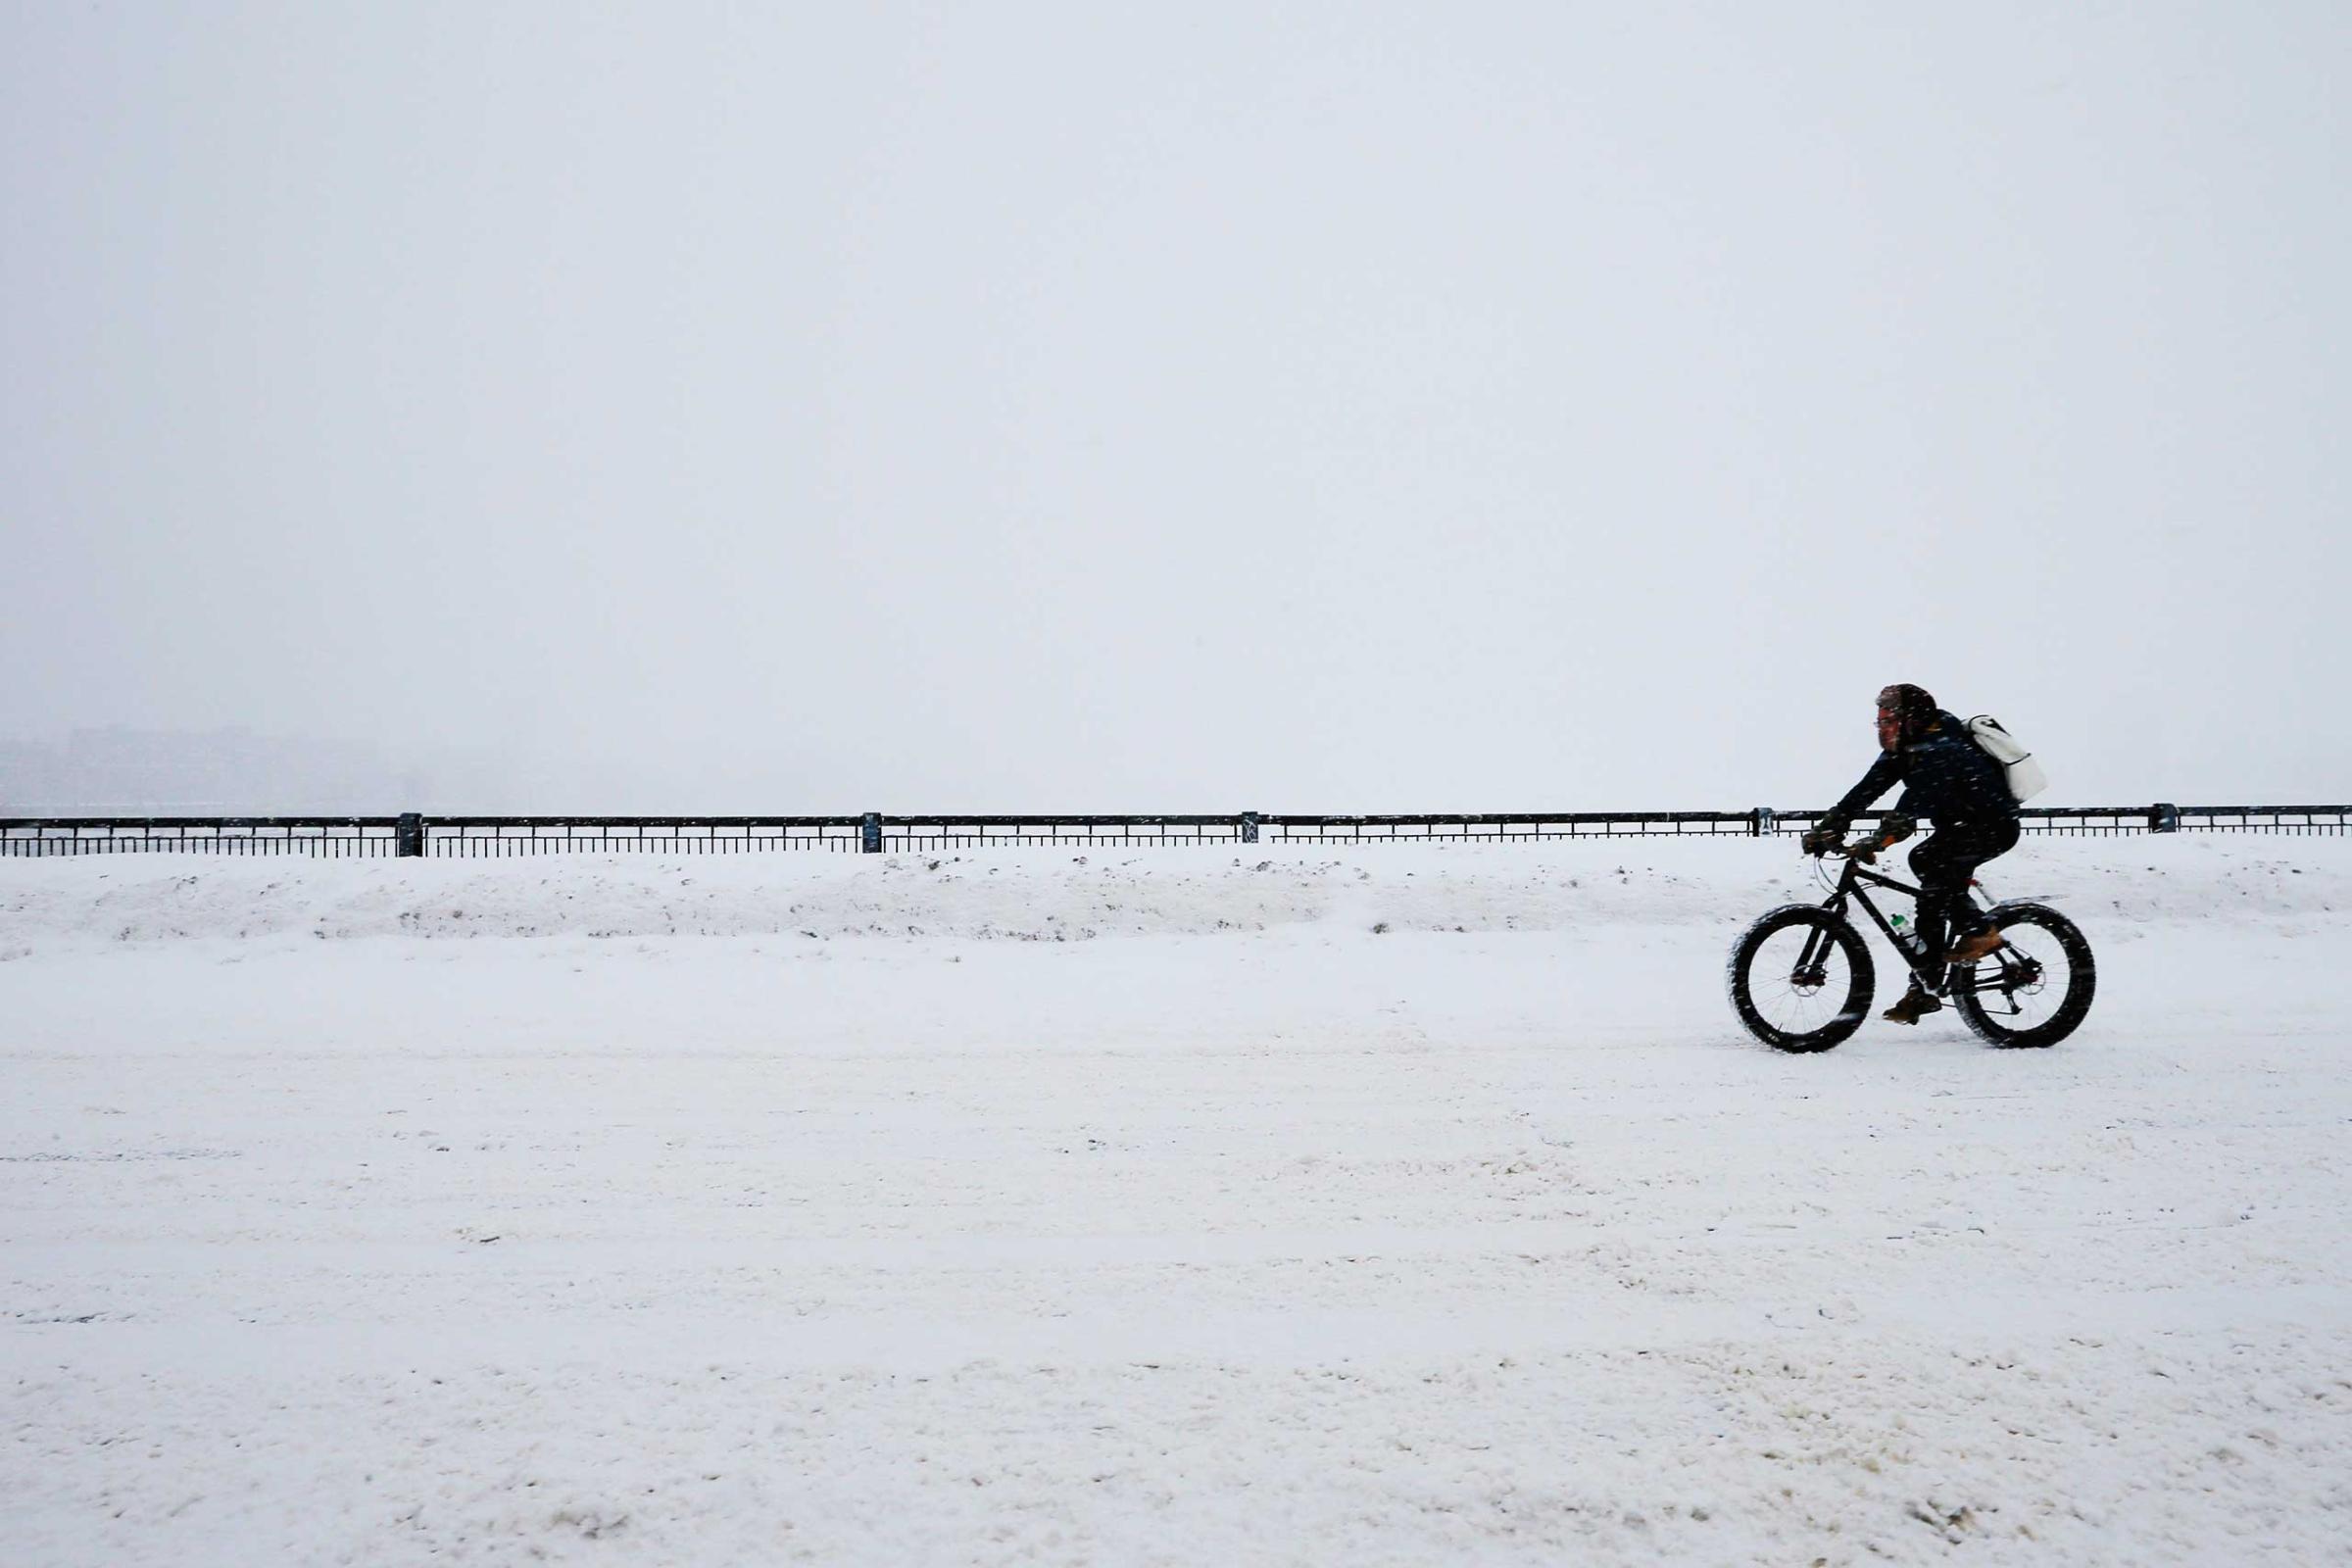 A cyclist rides across the Mass Ave bridge during a winter snow storm in Boston